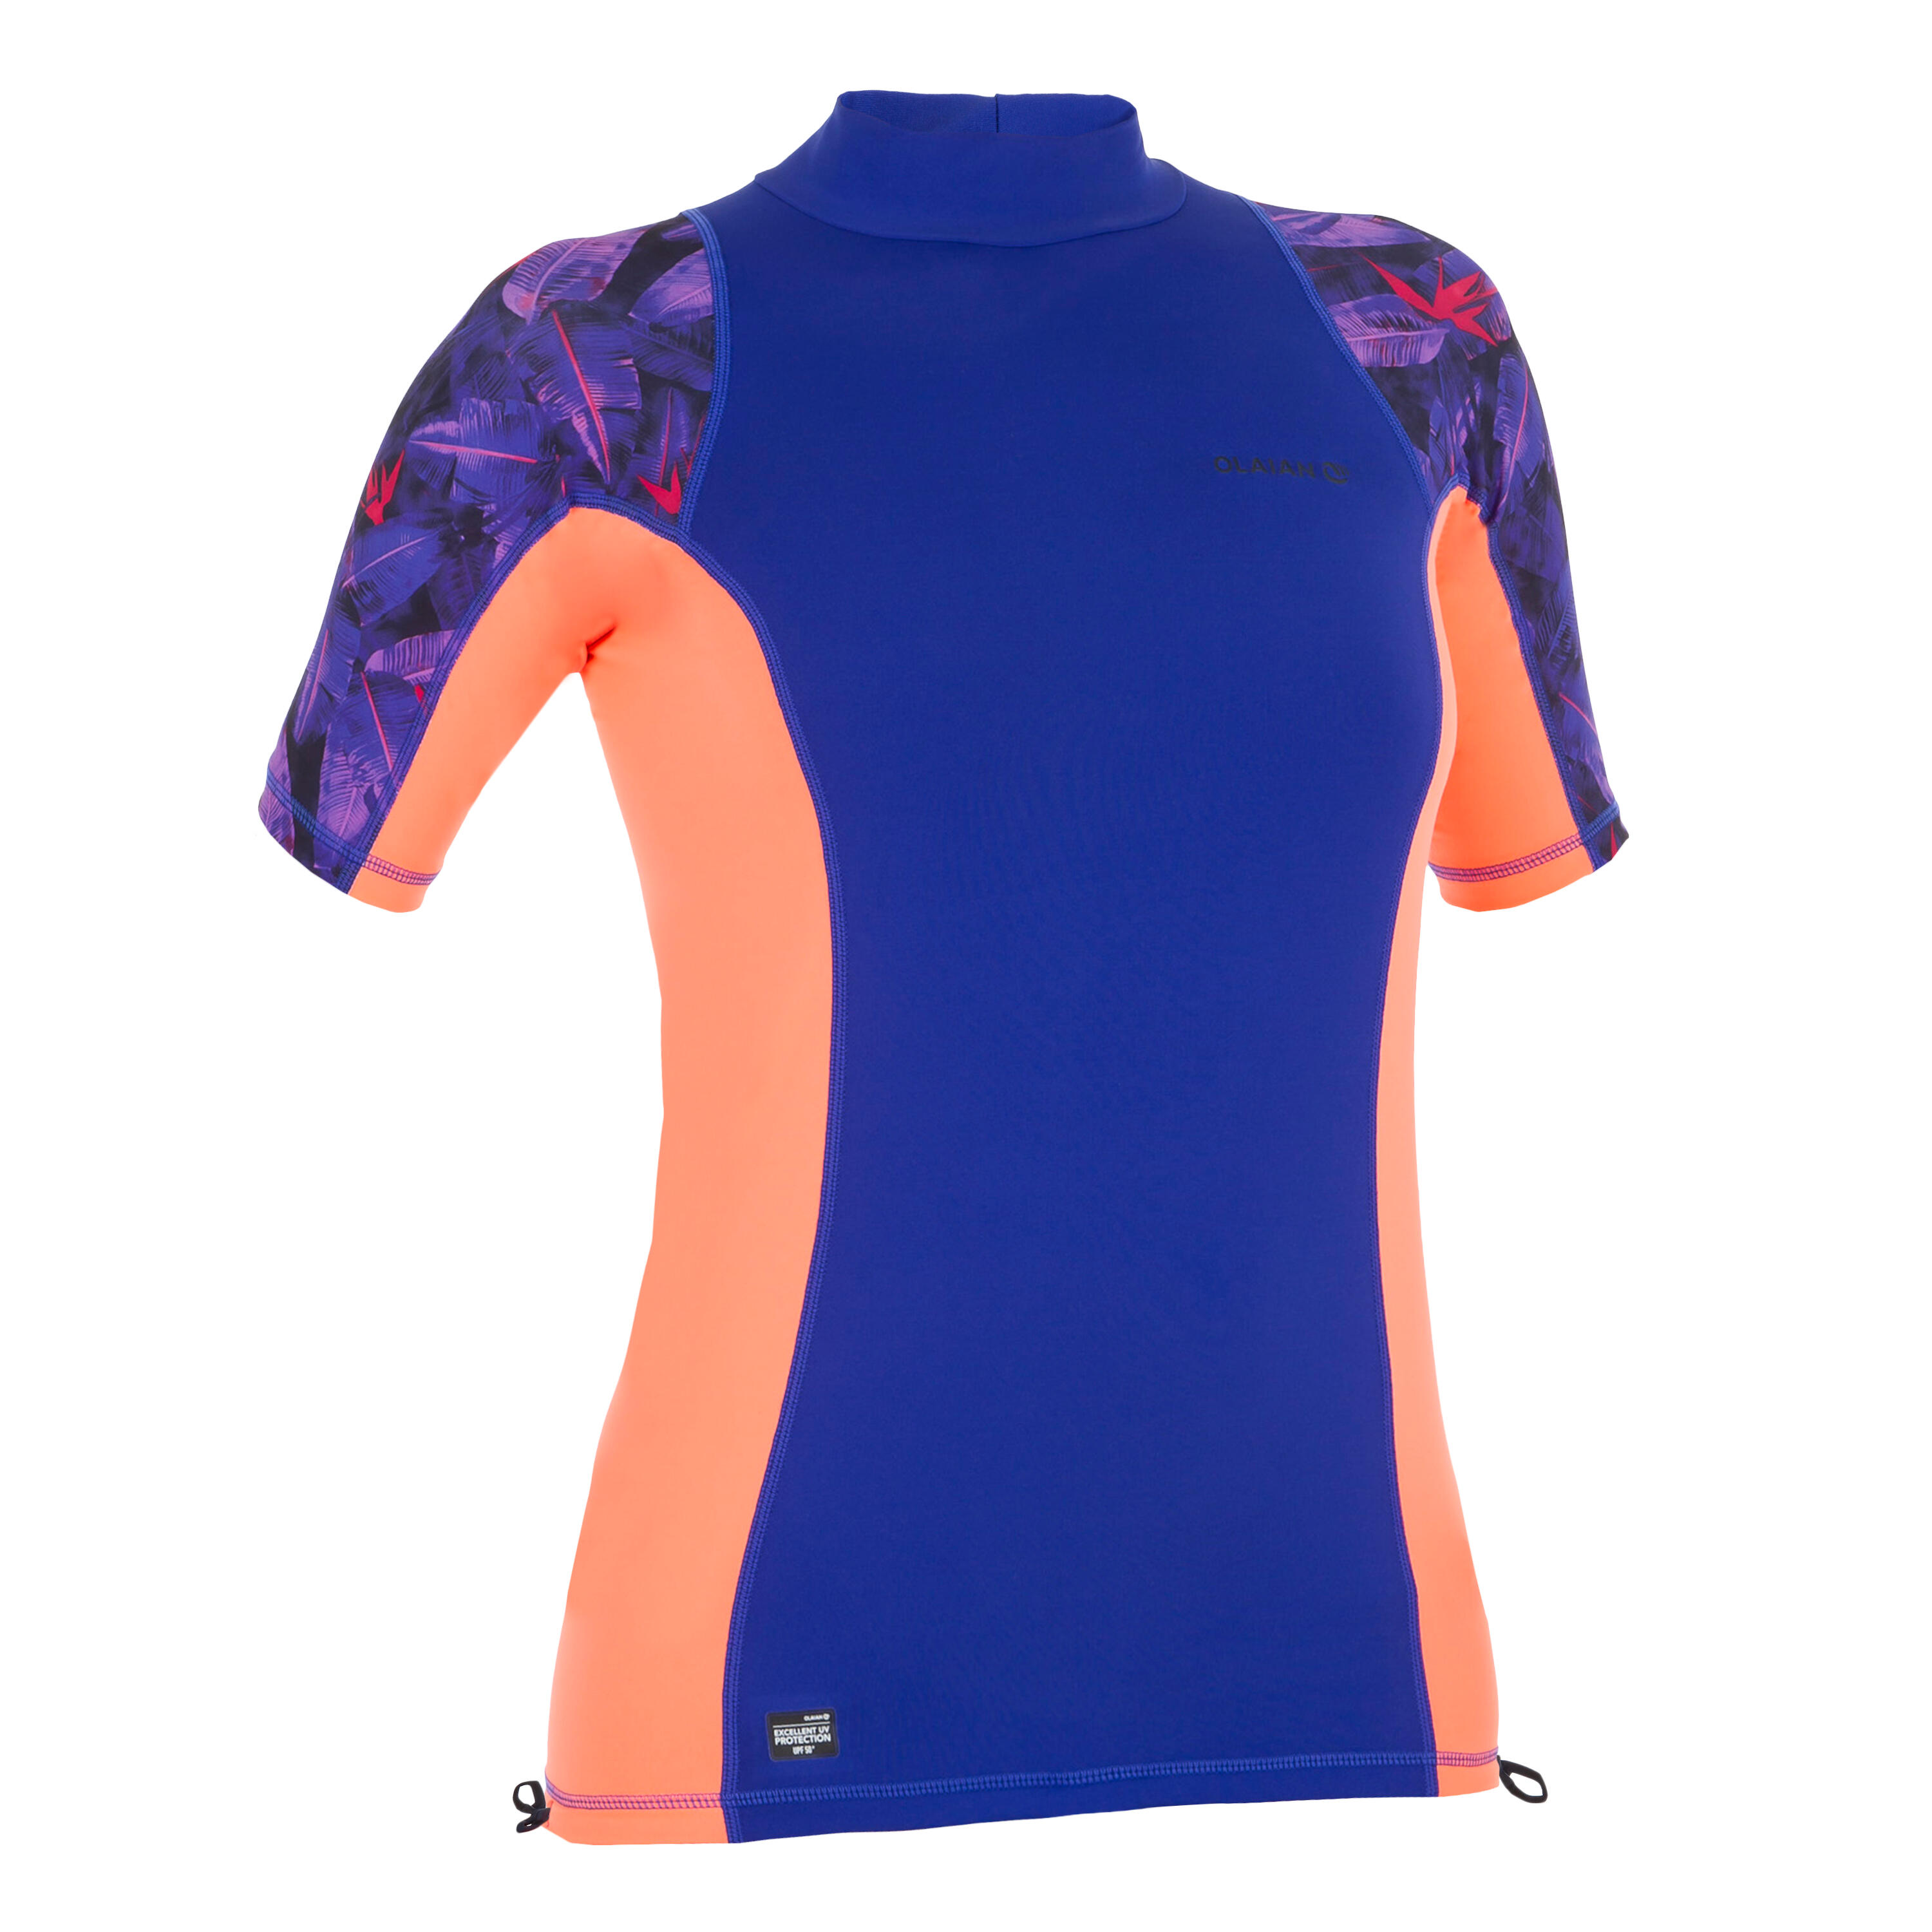 OLAIAN 500 women's short sleeve UV protection surfing T-shirt - Violet pink print